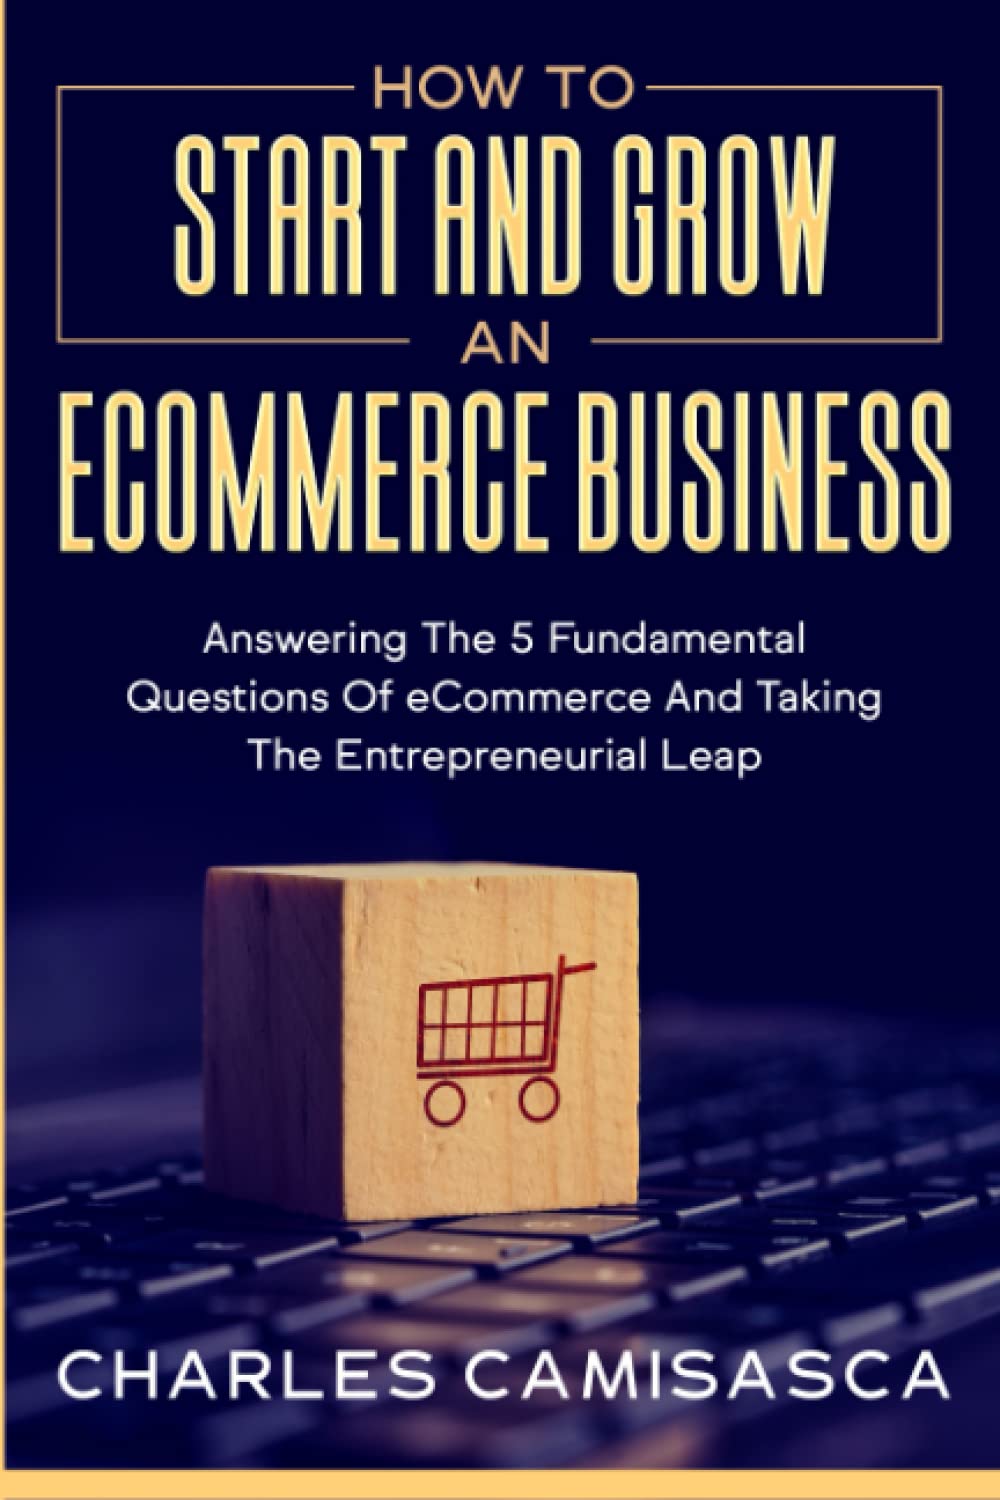 [2022 Version] How to Start and Grow an E-Commerce Business: Answering the 5 Fundamental Questions of eCommerce and Taking the Entrepreneurial Leap     Paperback – January 17, 2022